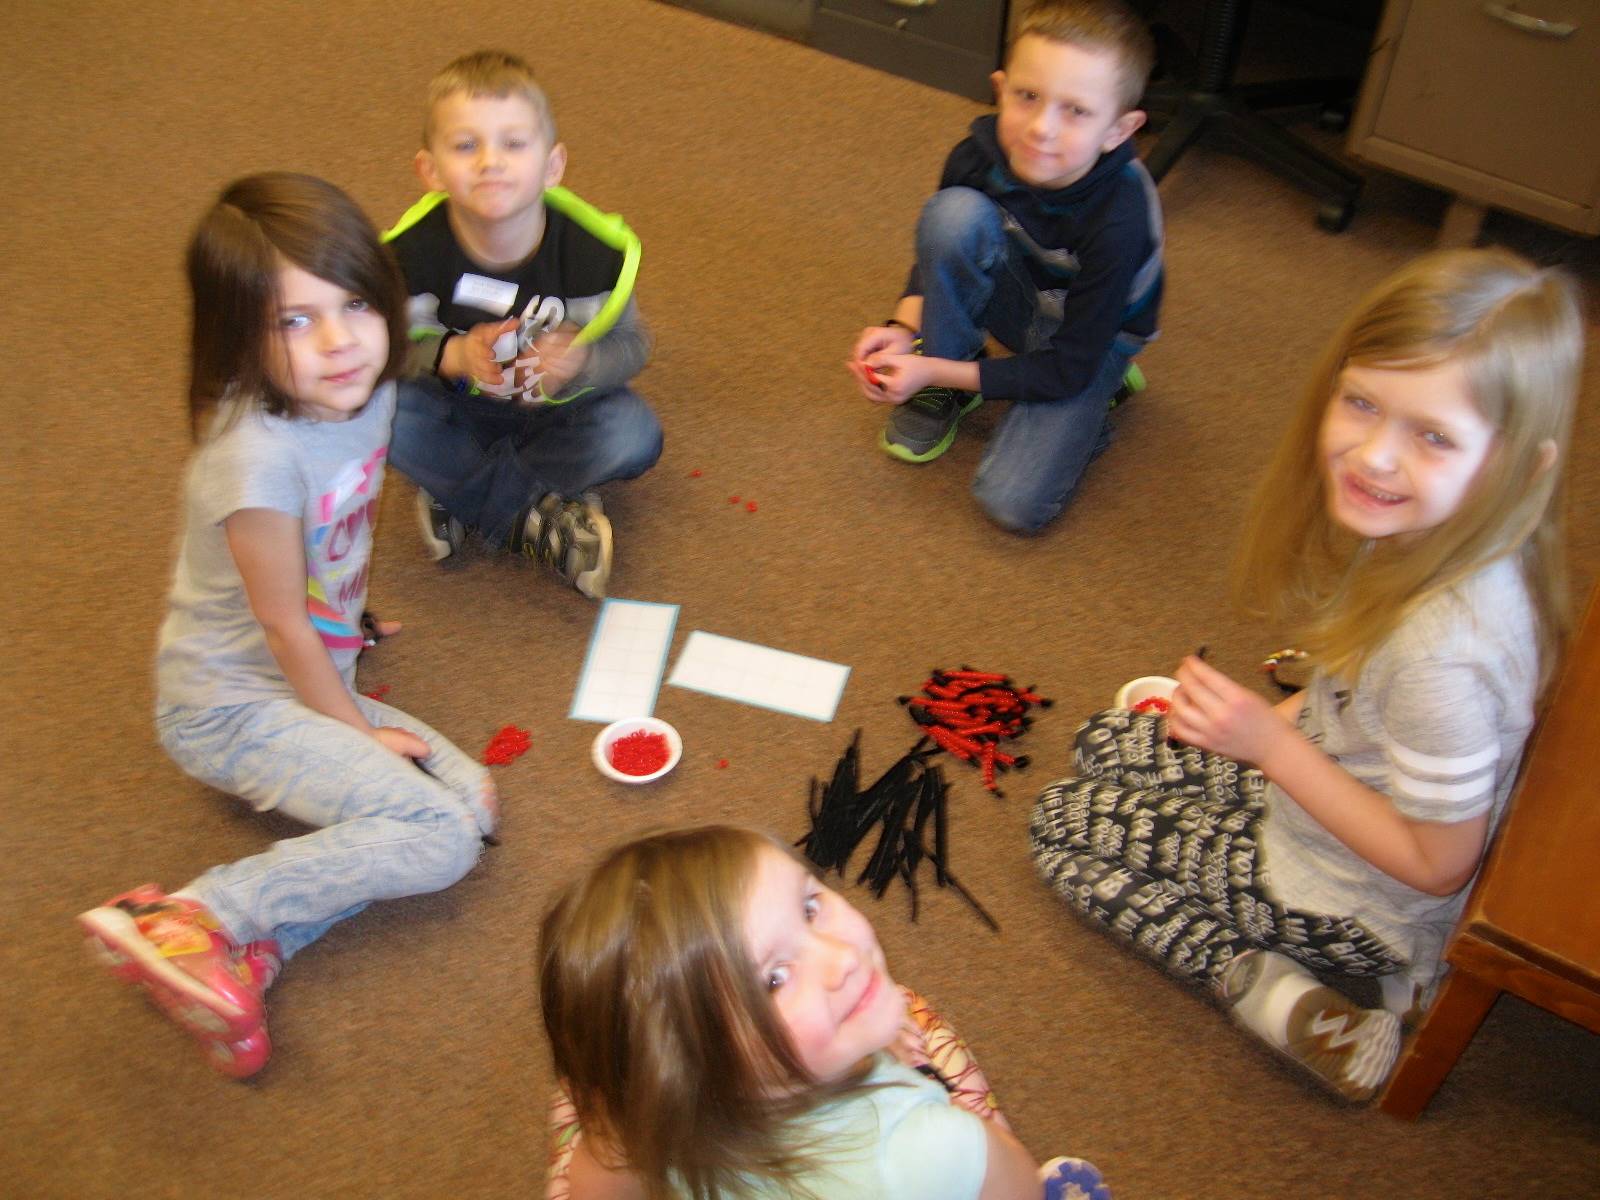 5 students create 100 wiggly worms.